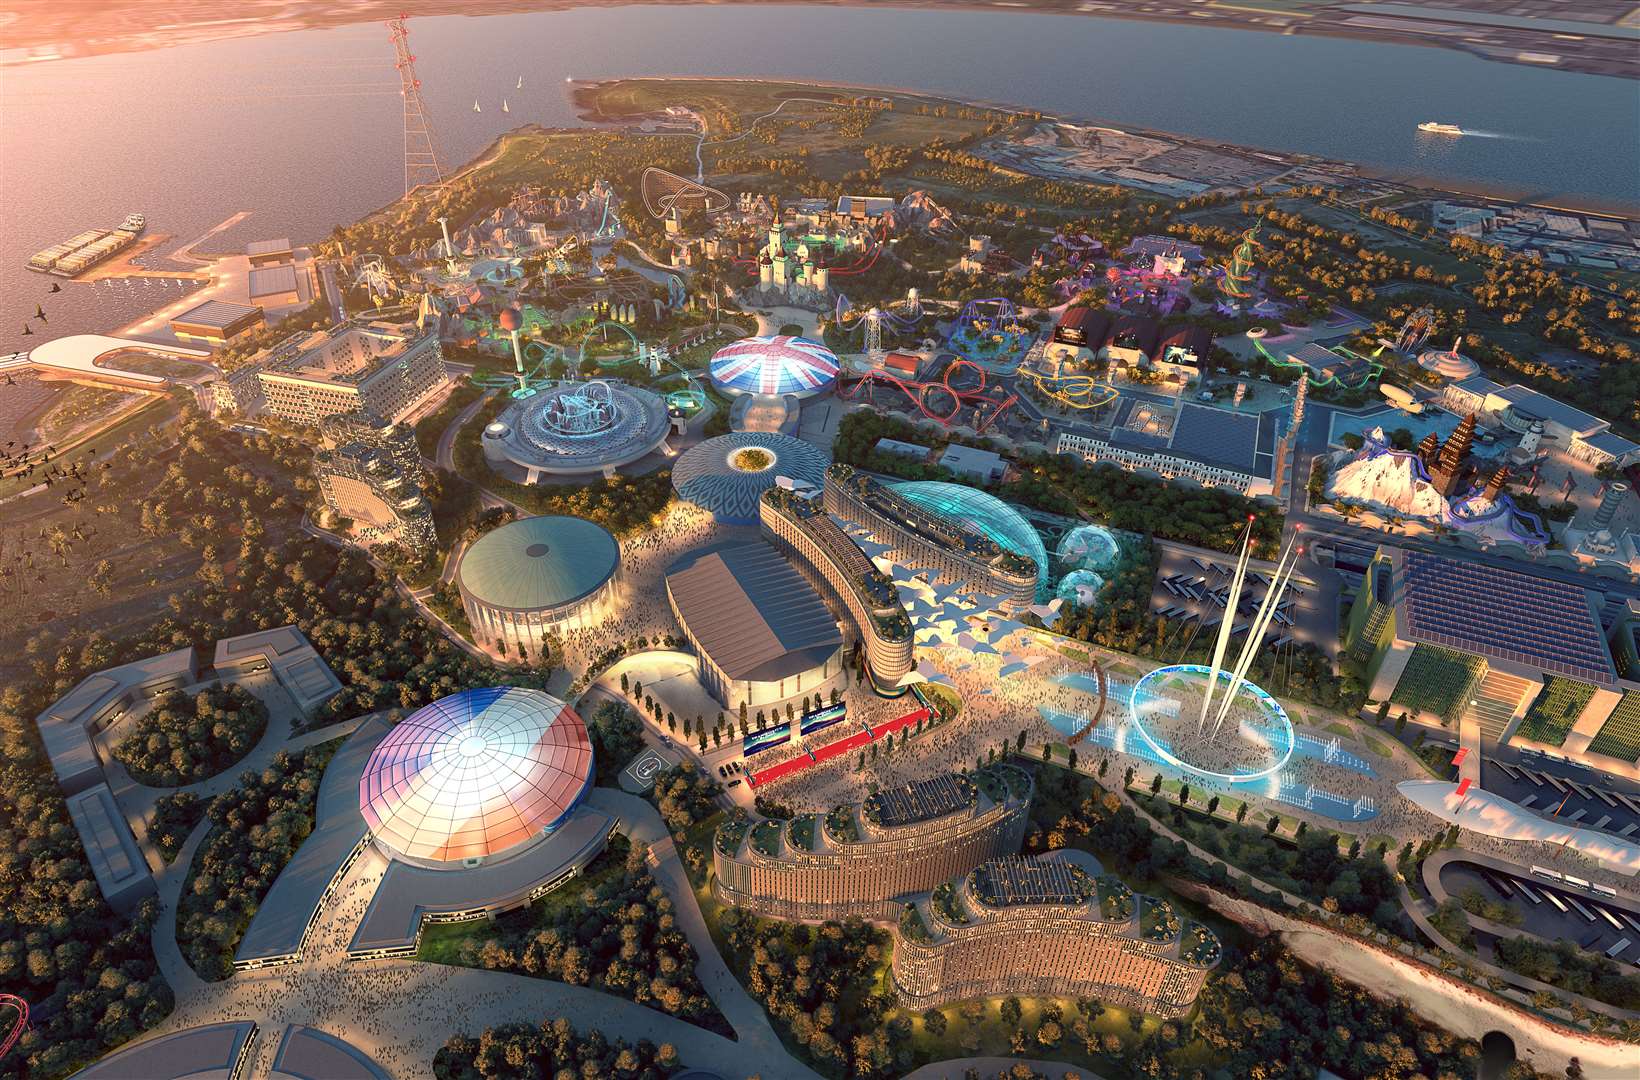 A new detailed impression of what the London Resort theme park will look like